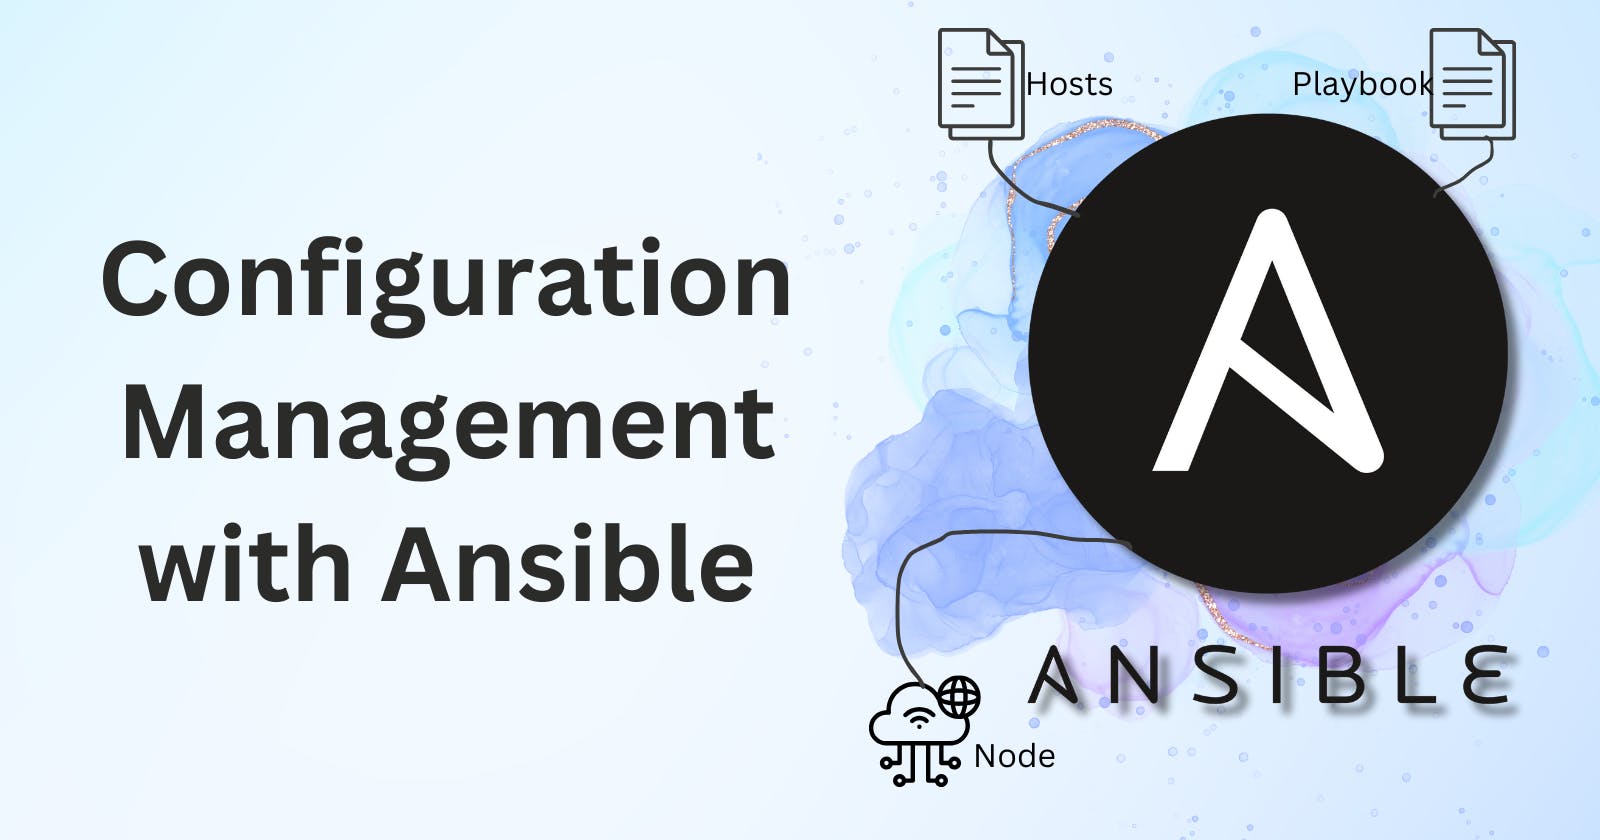 Configuration Management with Ansible